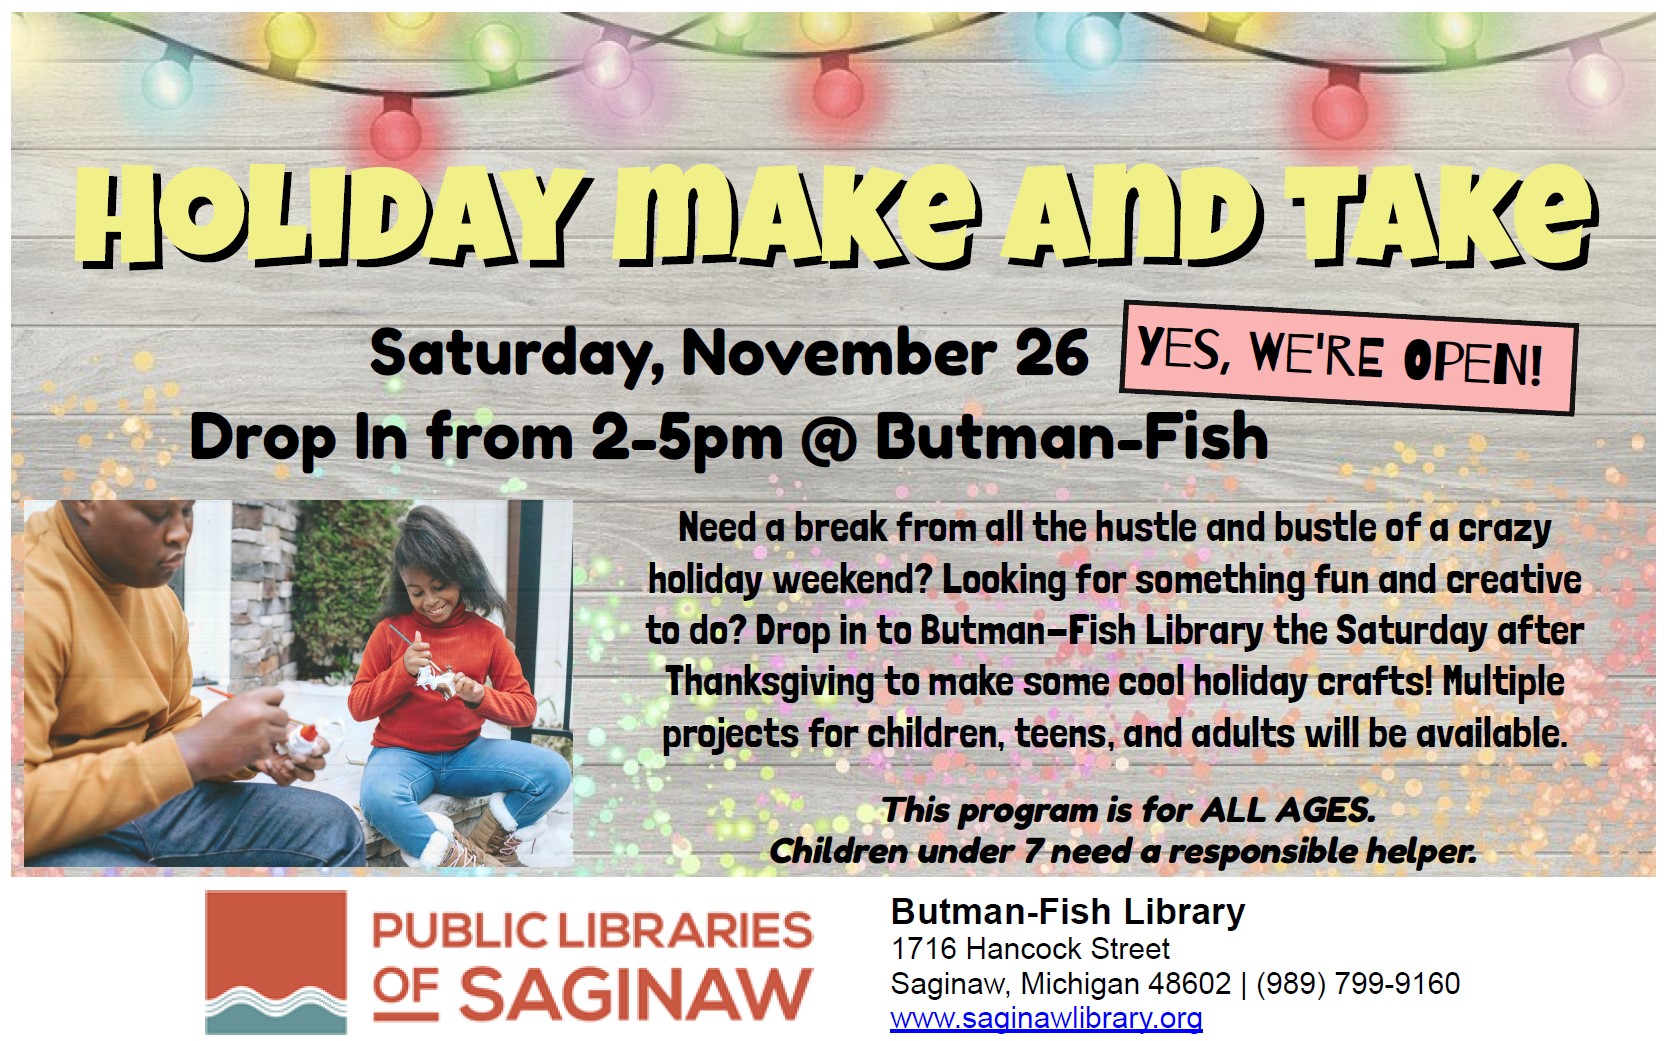 Holiday Make & Take Flyer for Saturday, November 26. Drop in from 2-4:45 at Butman-Fish.